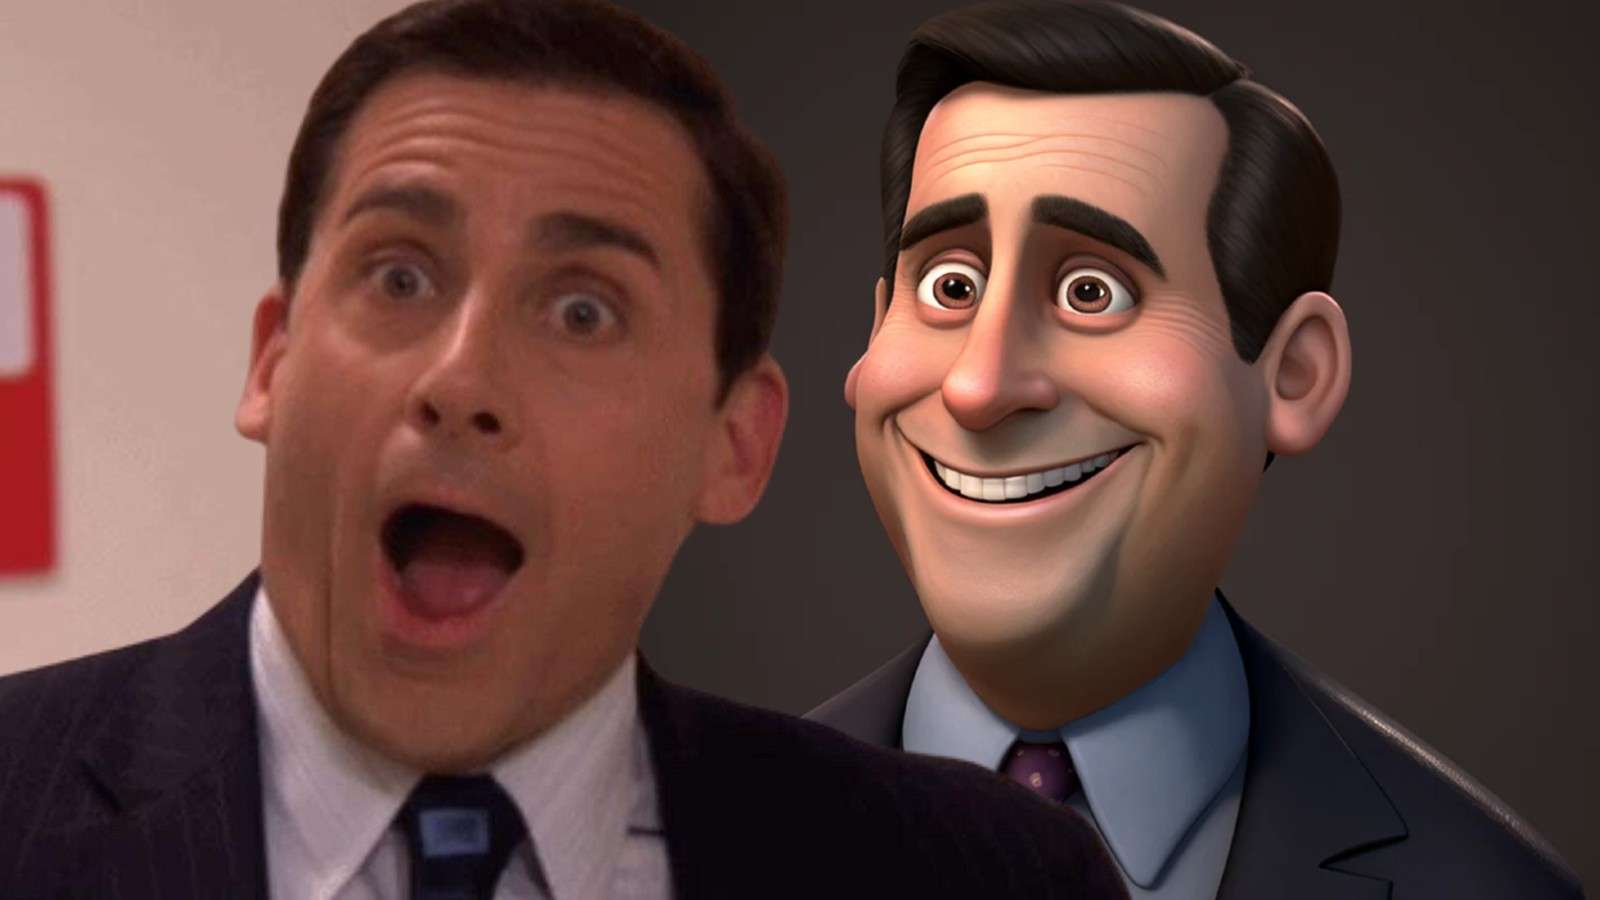 Michael Scott in The Office and the AI Pixar version of the character